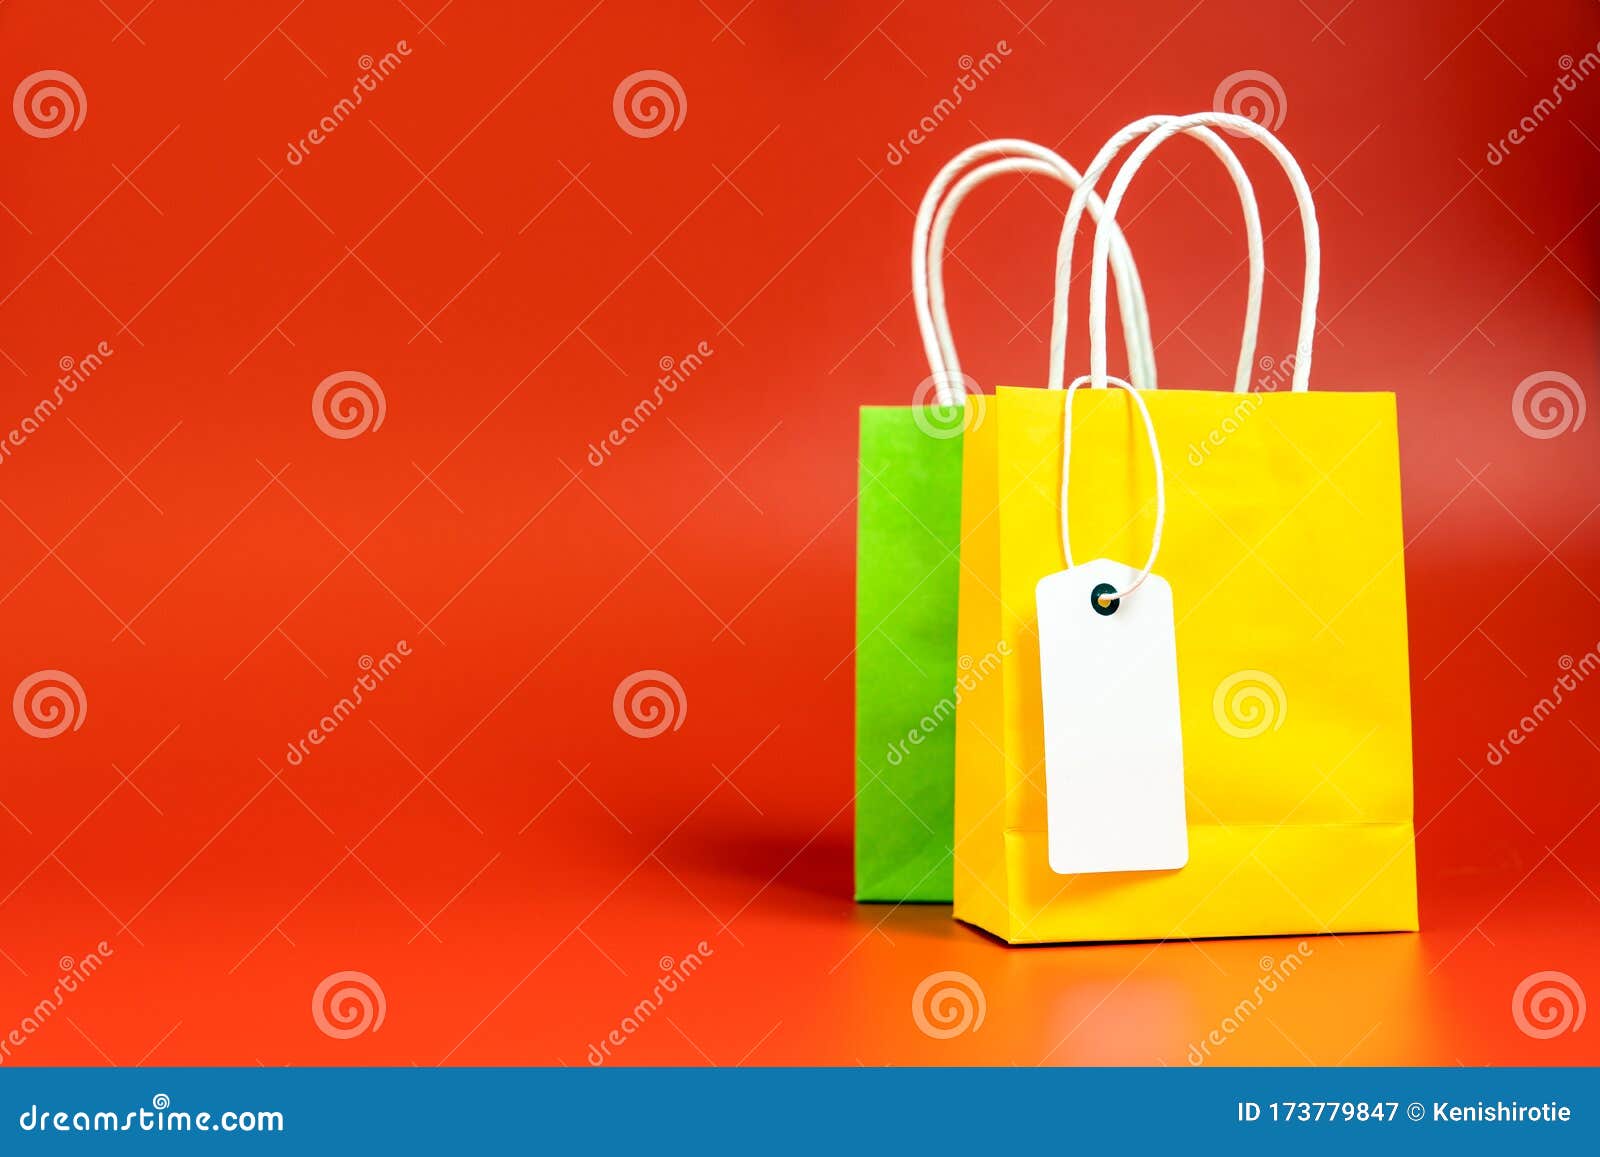 Yellow and Green Shopping or Gift Bags Isolated on Red Stock Image ...